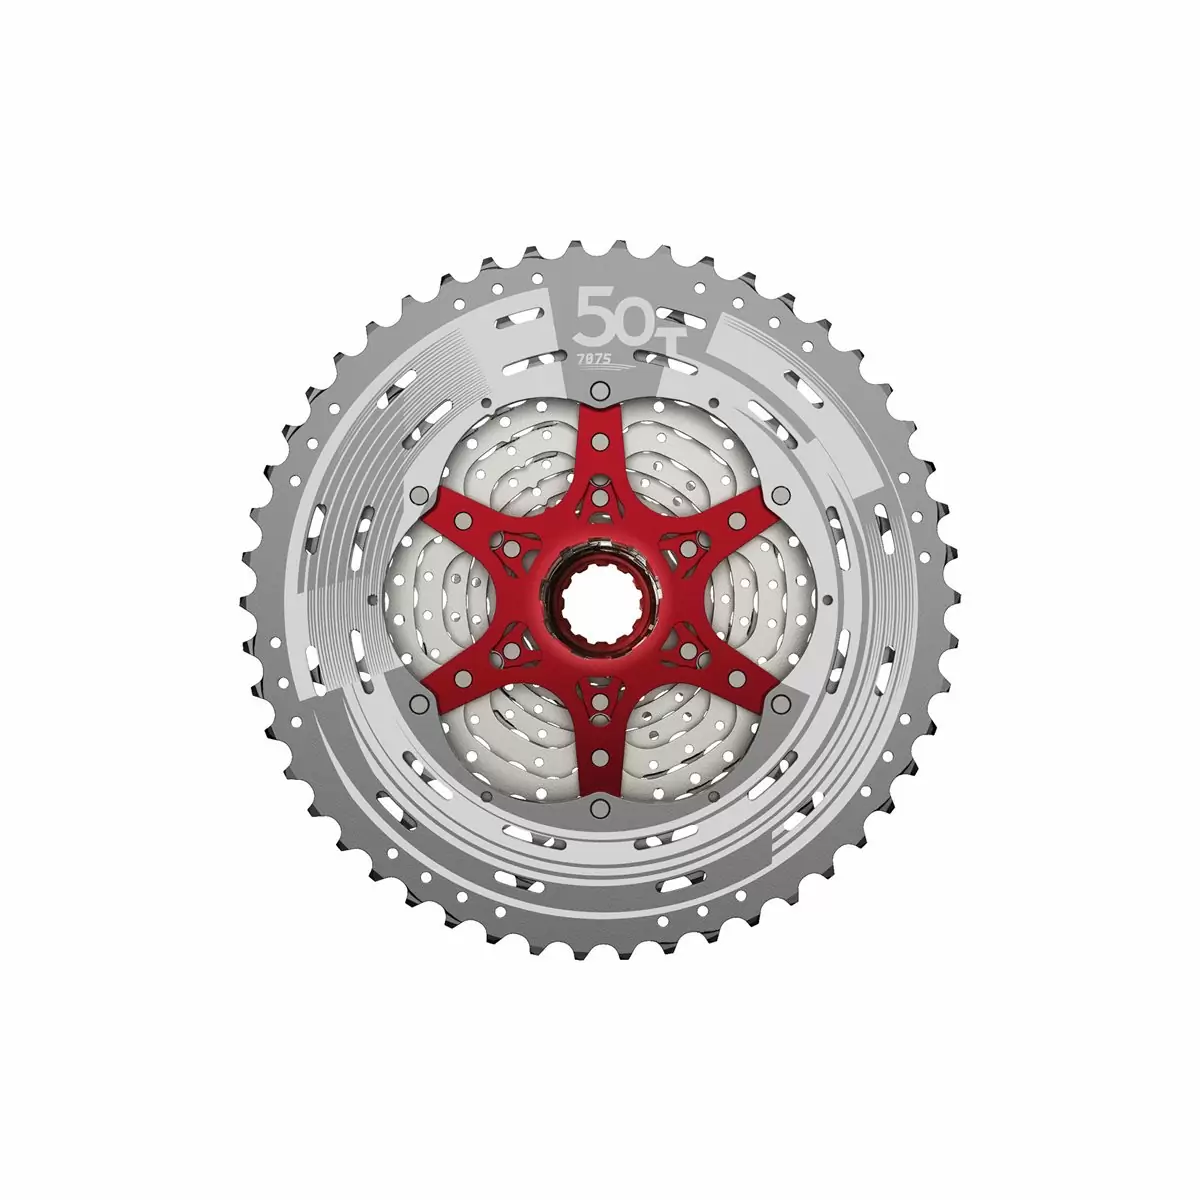 MZ90 Wide Ratio 12-speed cassette 11-50T Shimano HG compatible silver #1